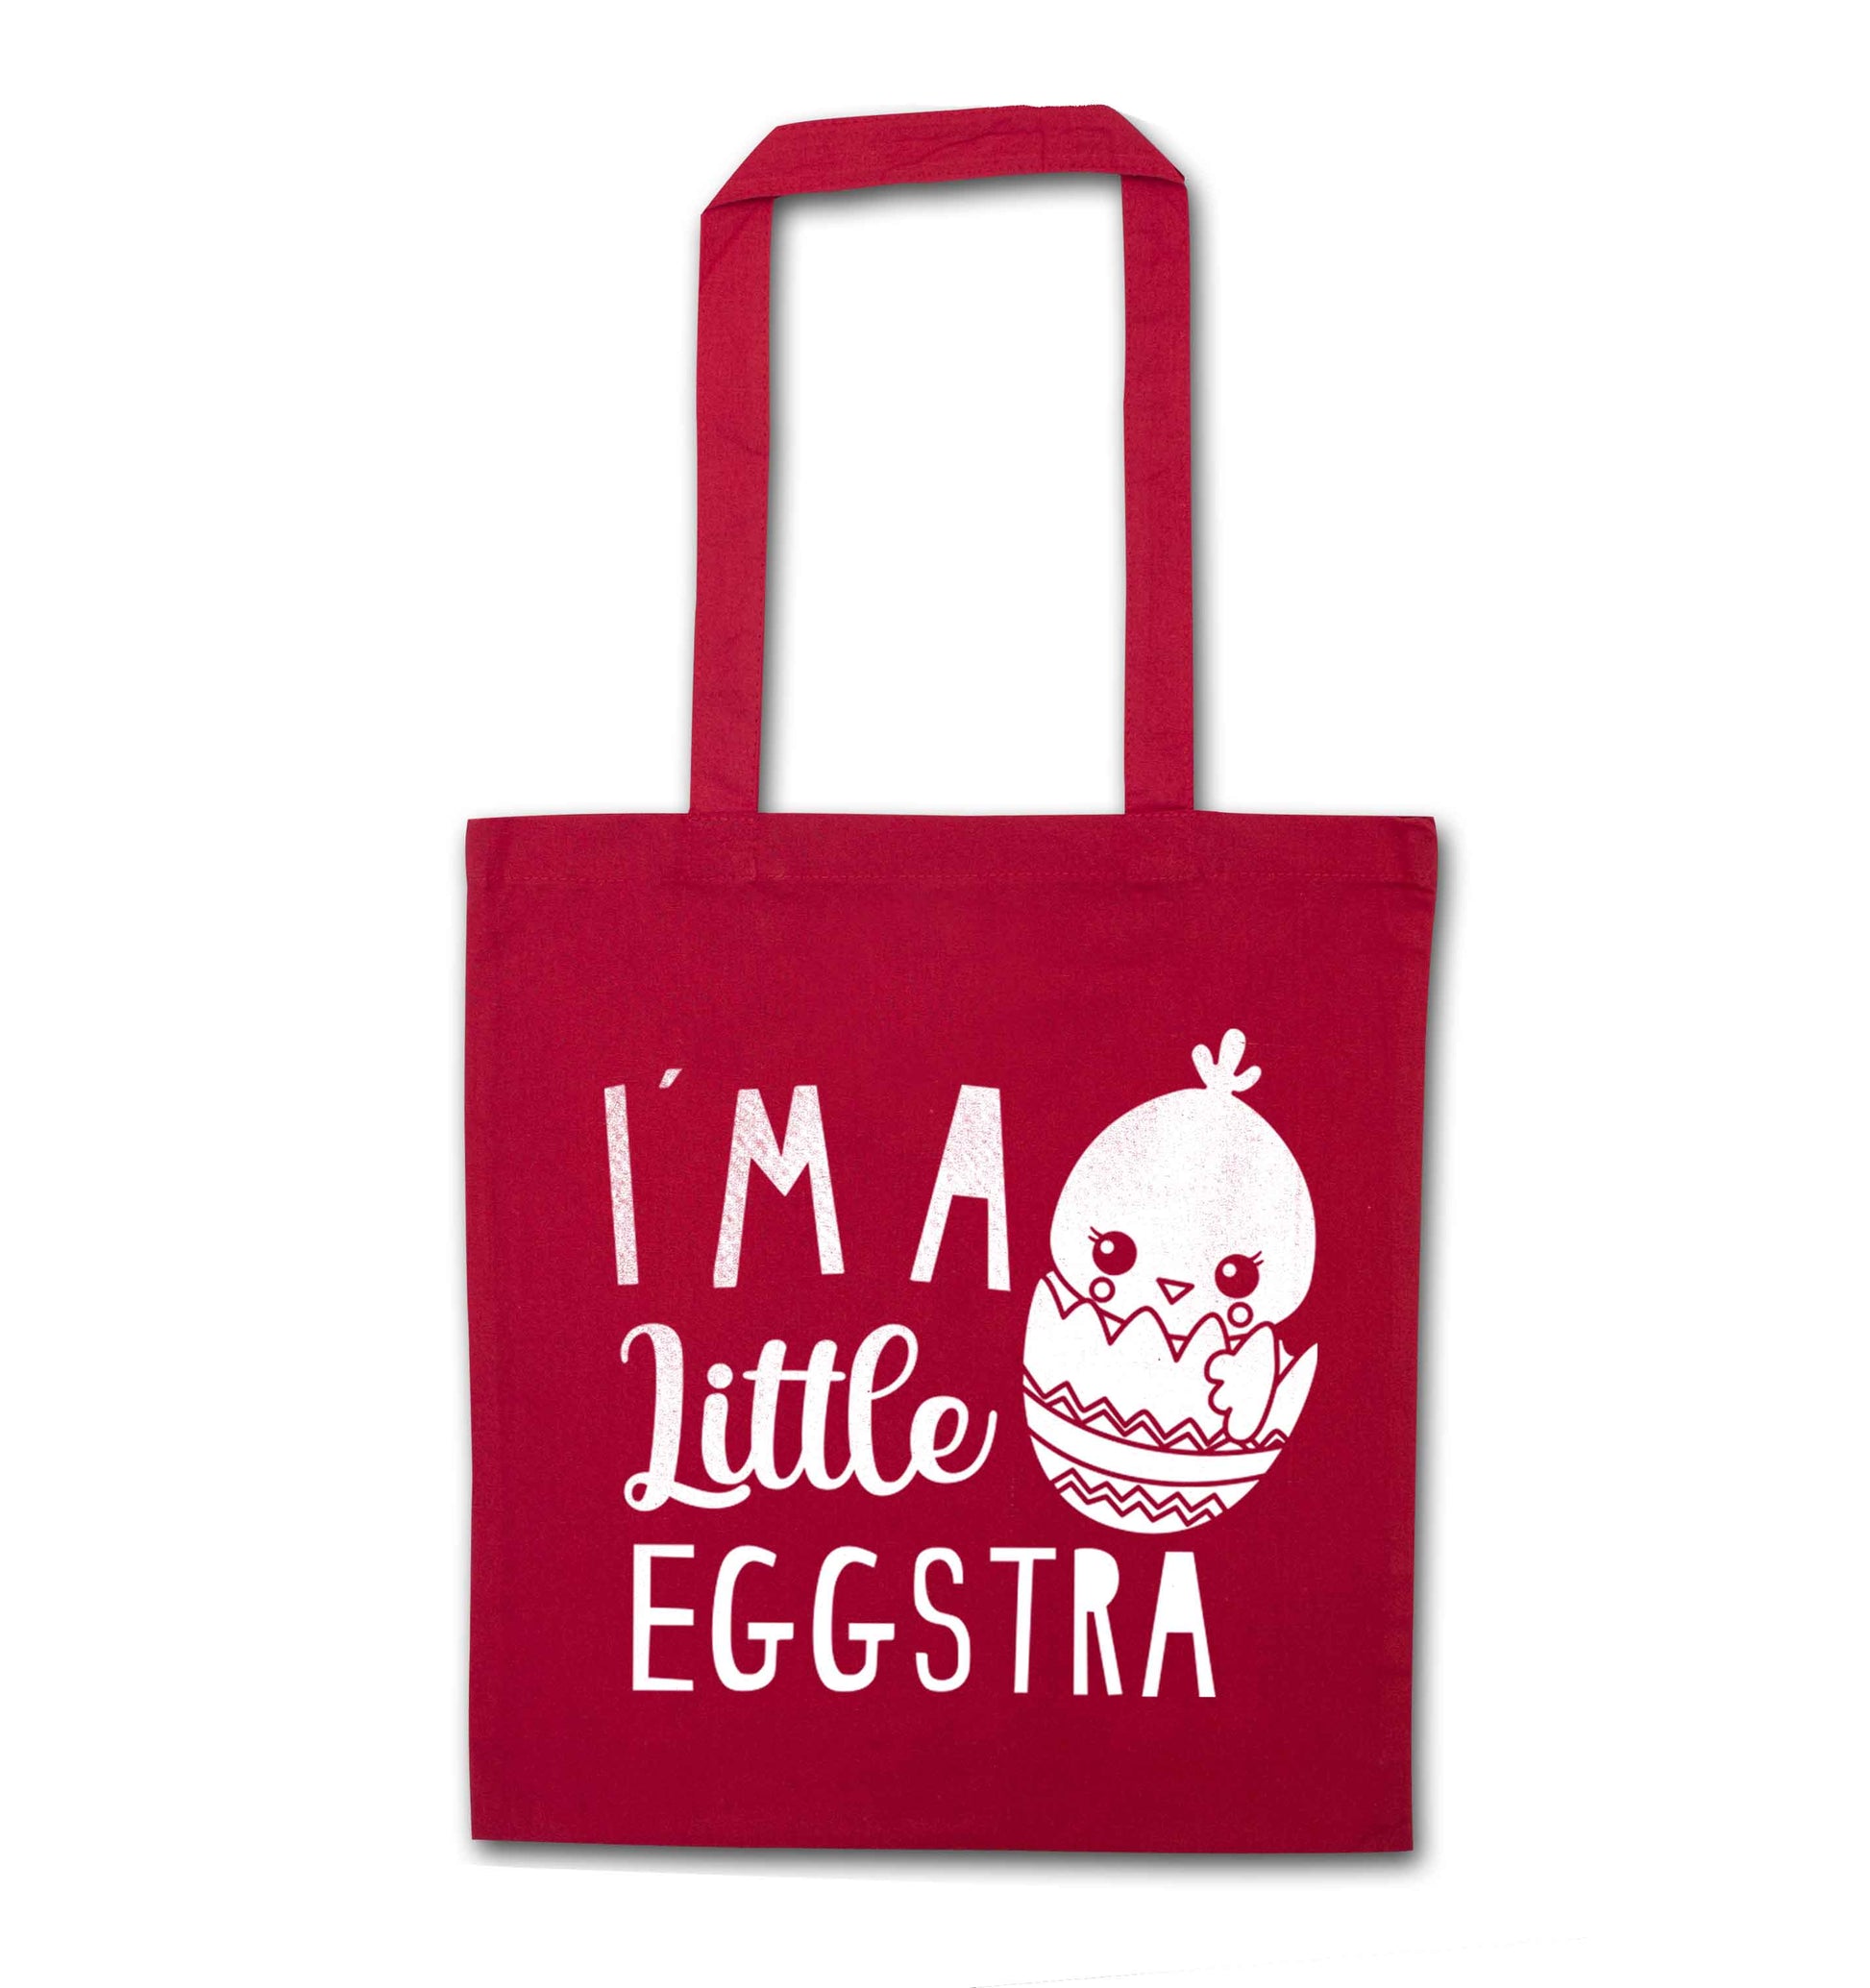 I'm a little eggstra red tote bag